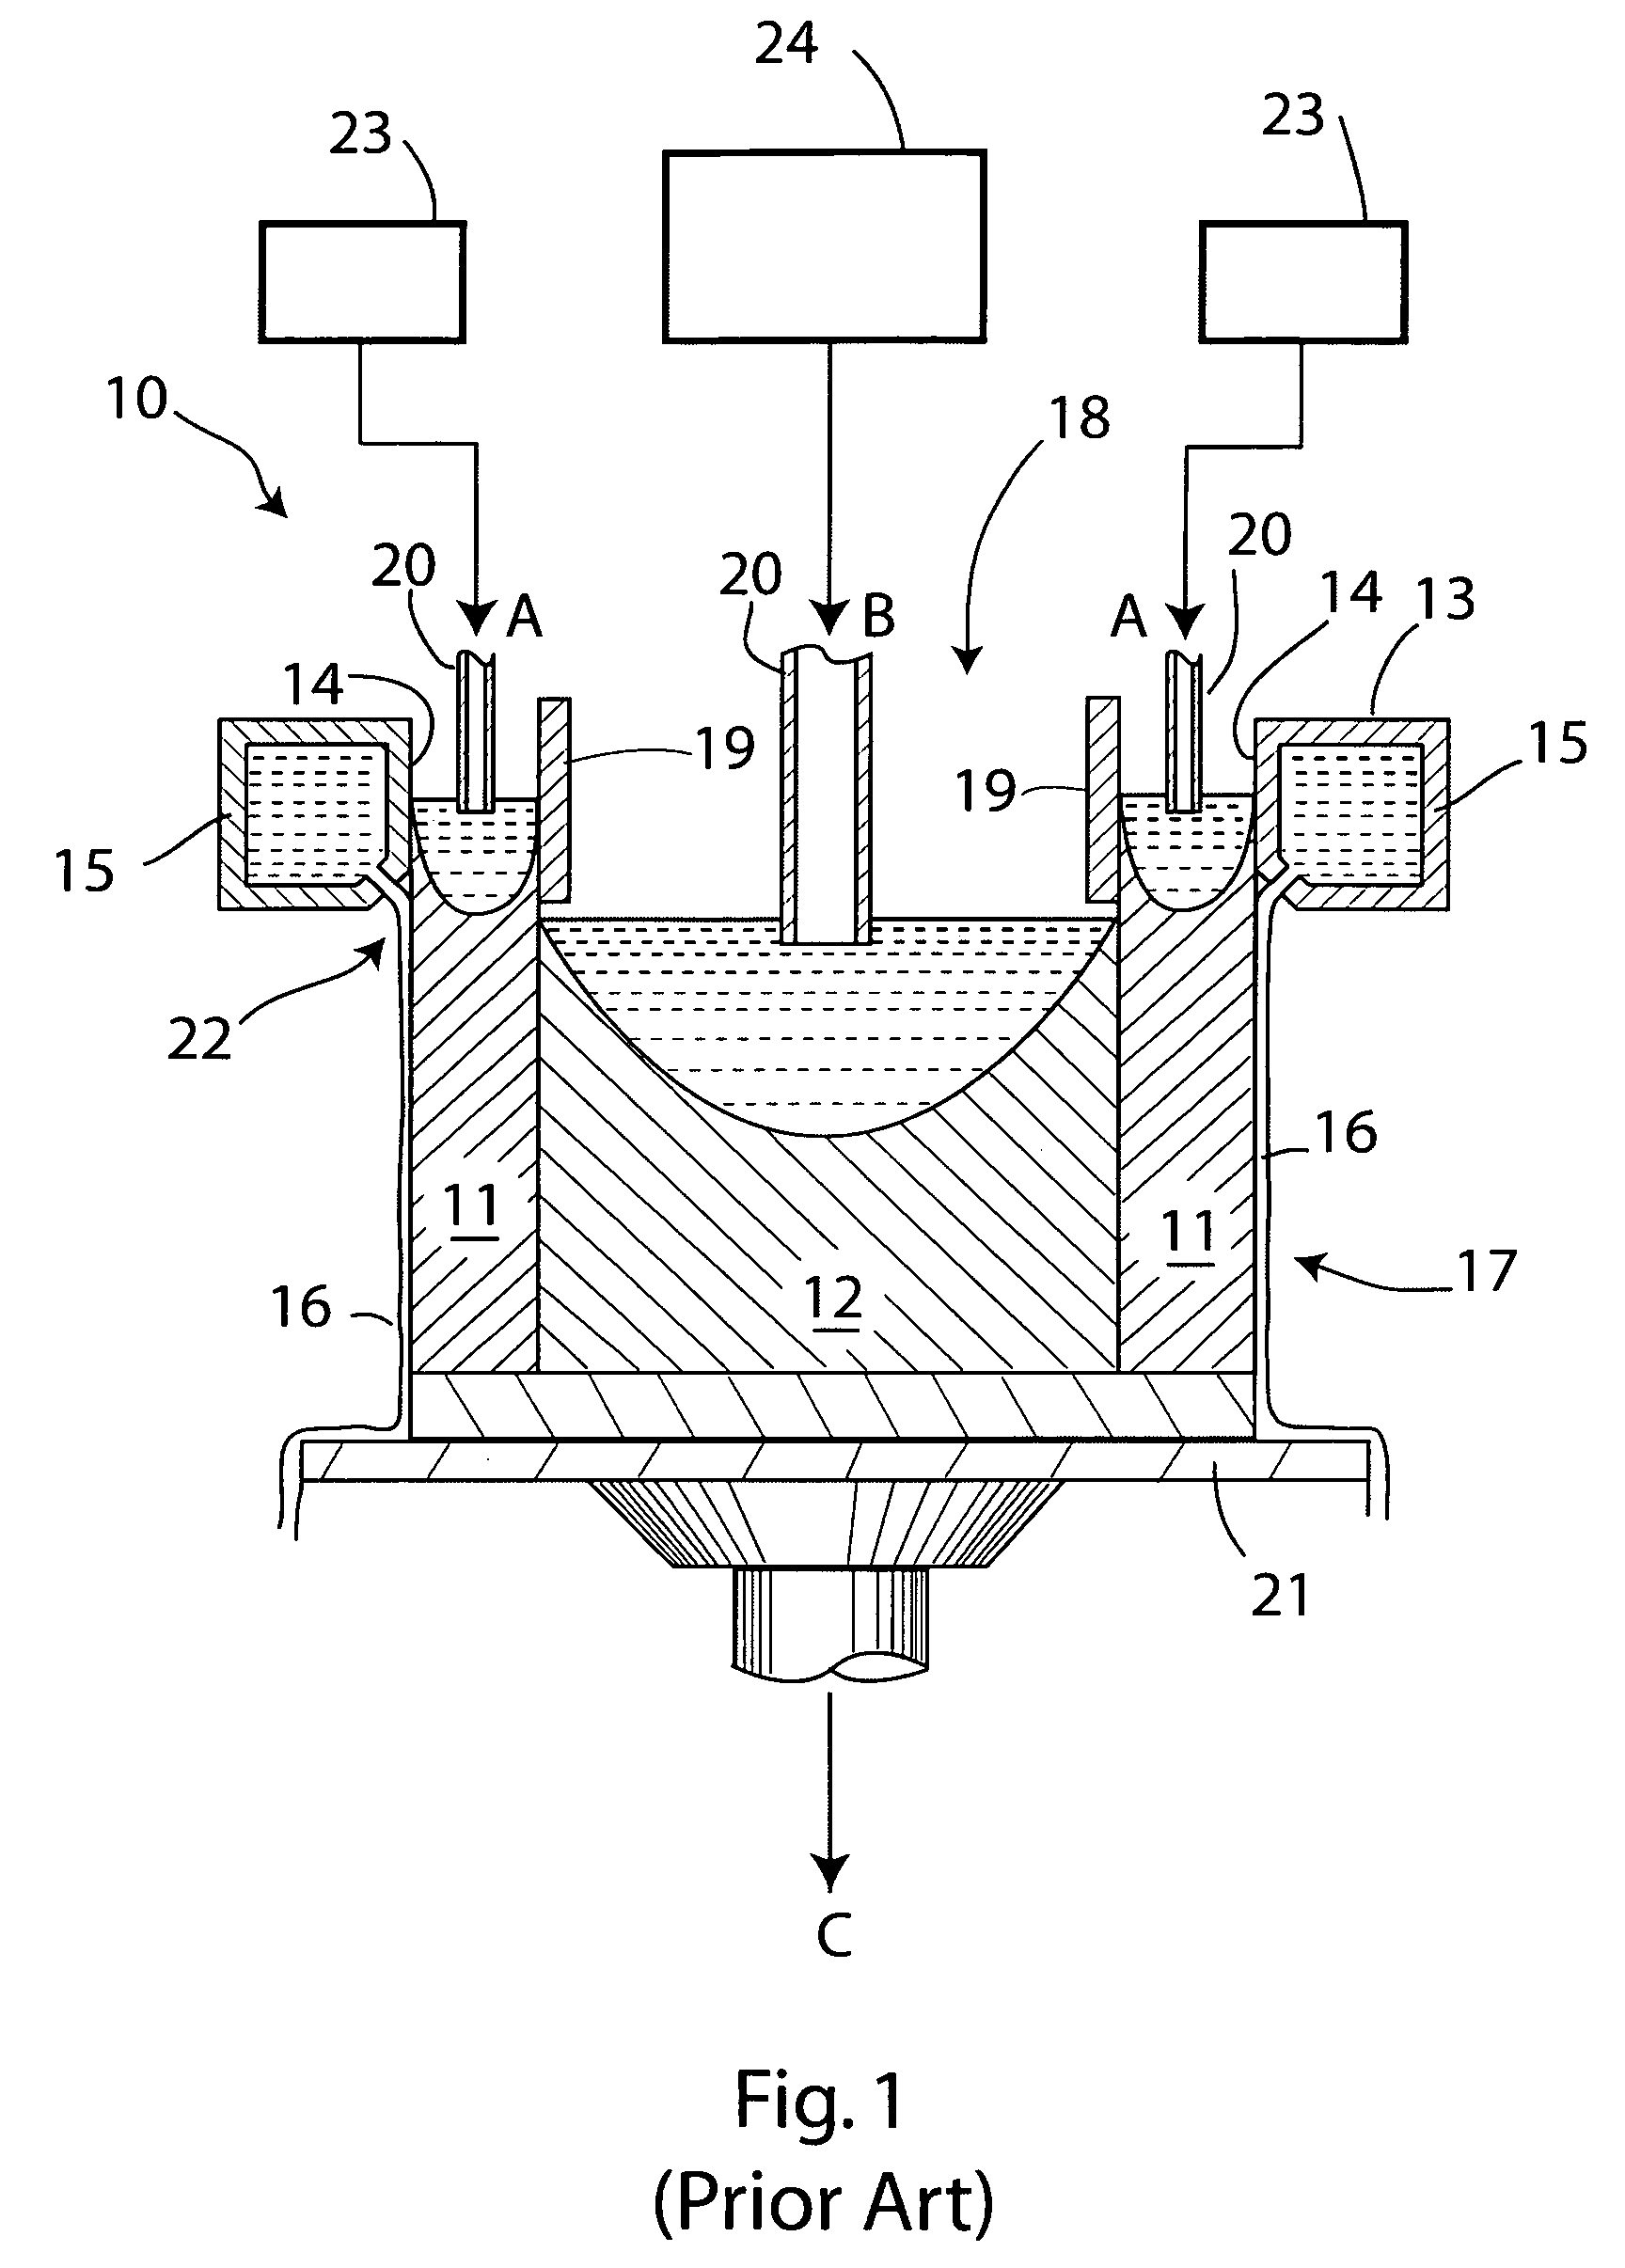 Oxide restraint during co-casting of metals